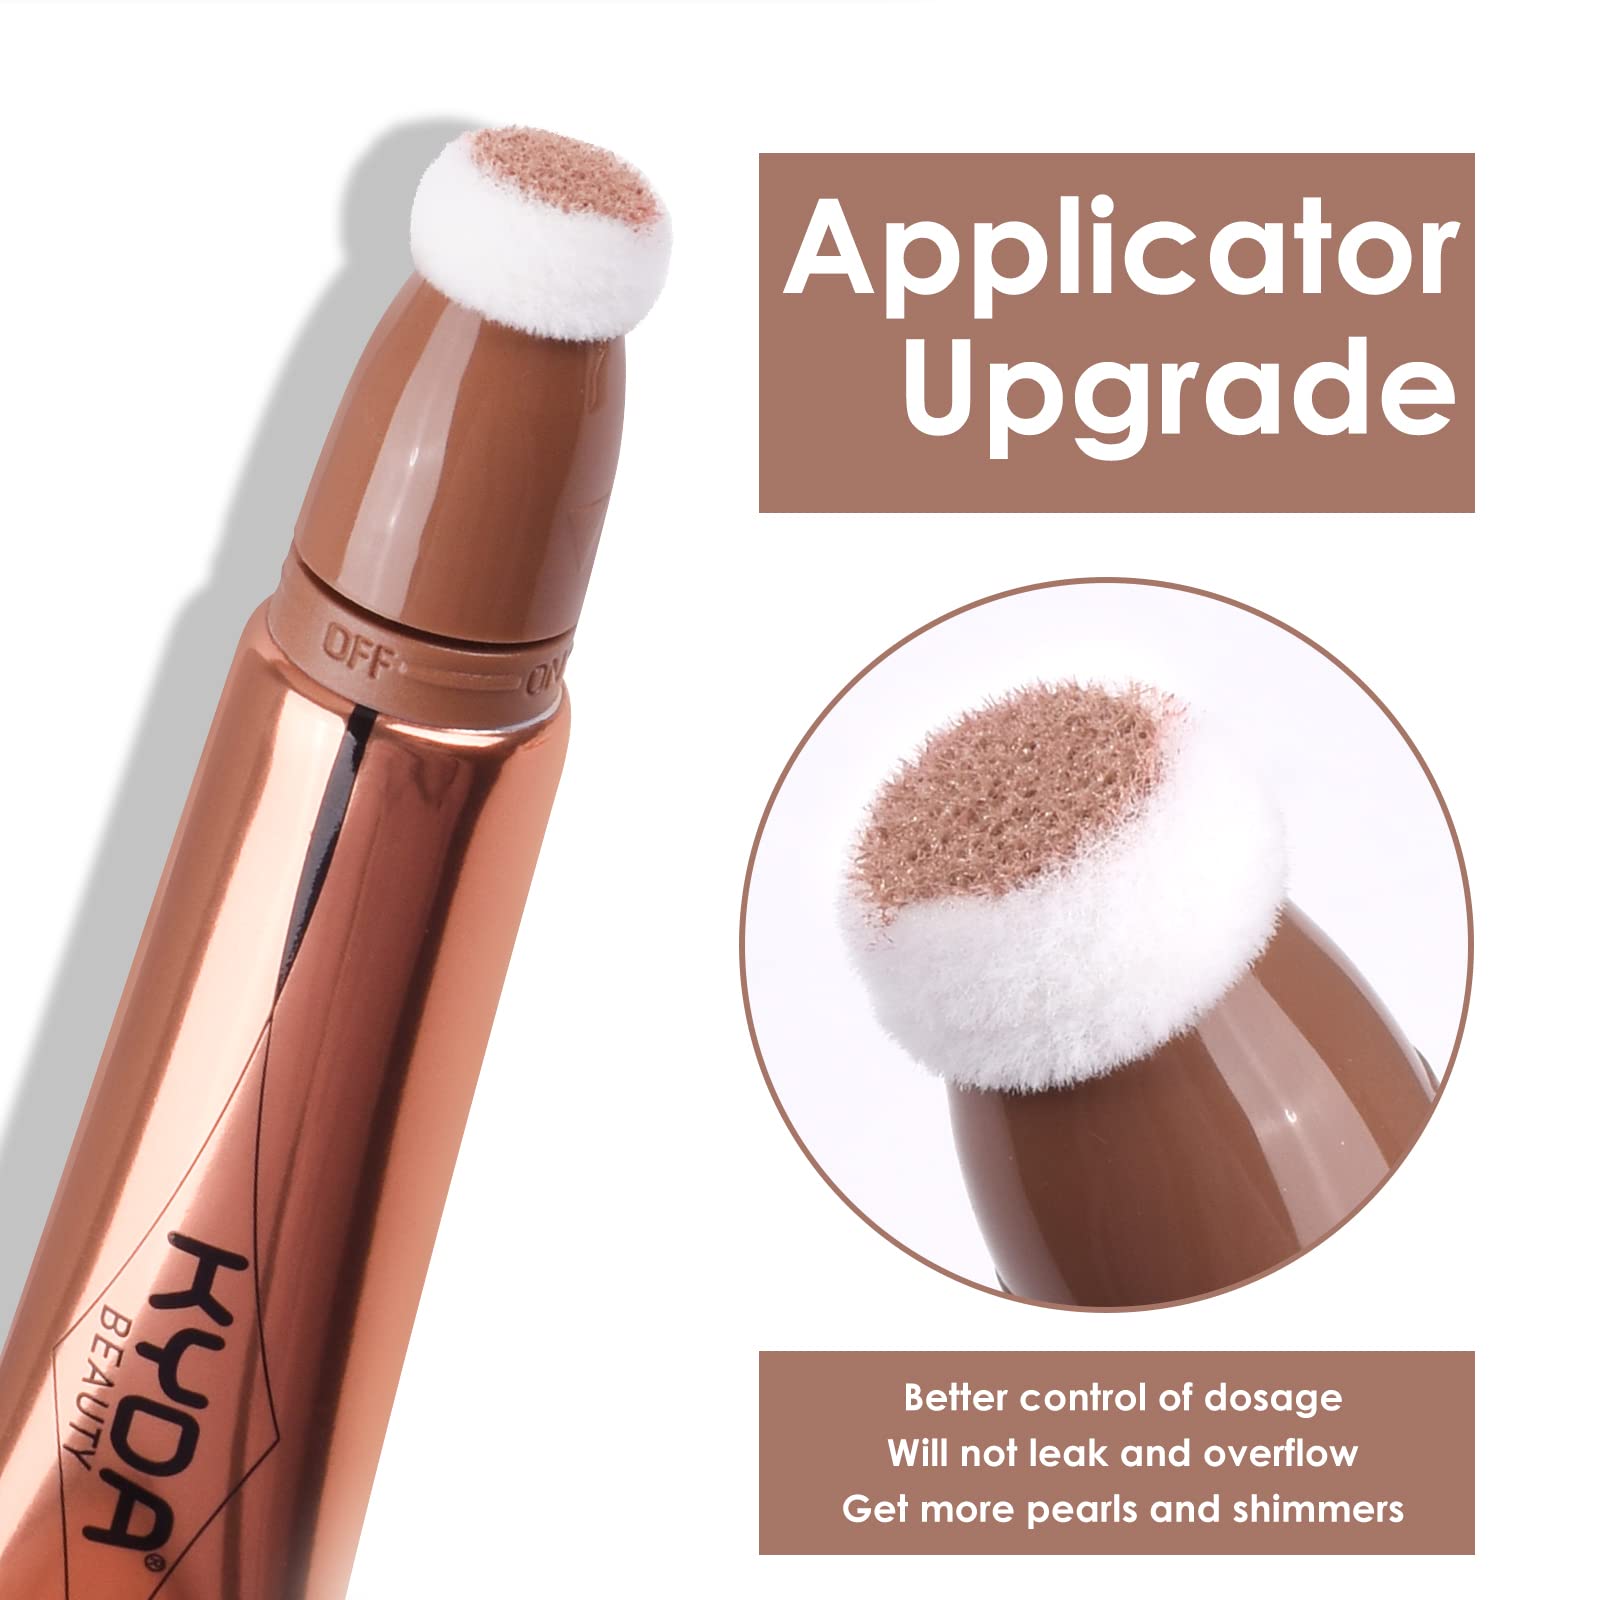 KYDA Highlighter Beauty Wand, Liquid Face Illuminator with Cushion Applicator, Natural Glossy Finish Smooth Creamy Texture, Highlighter Bronzer Makeup, Lightweight Breathable, by Ownest Beauty-#Spotlight Highlighter